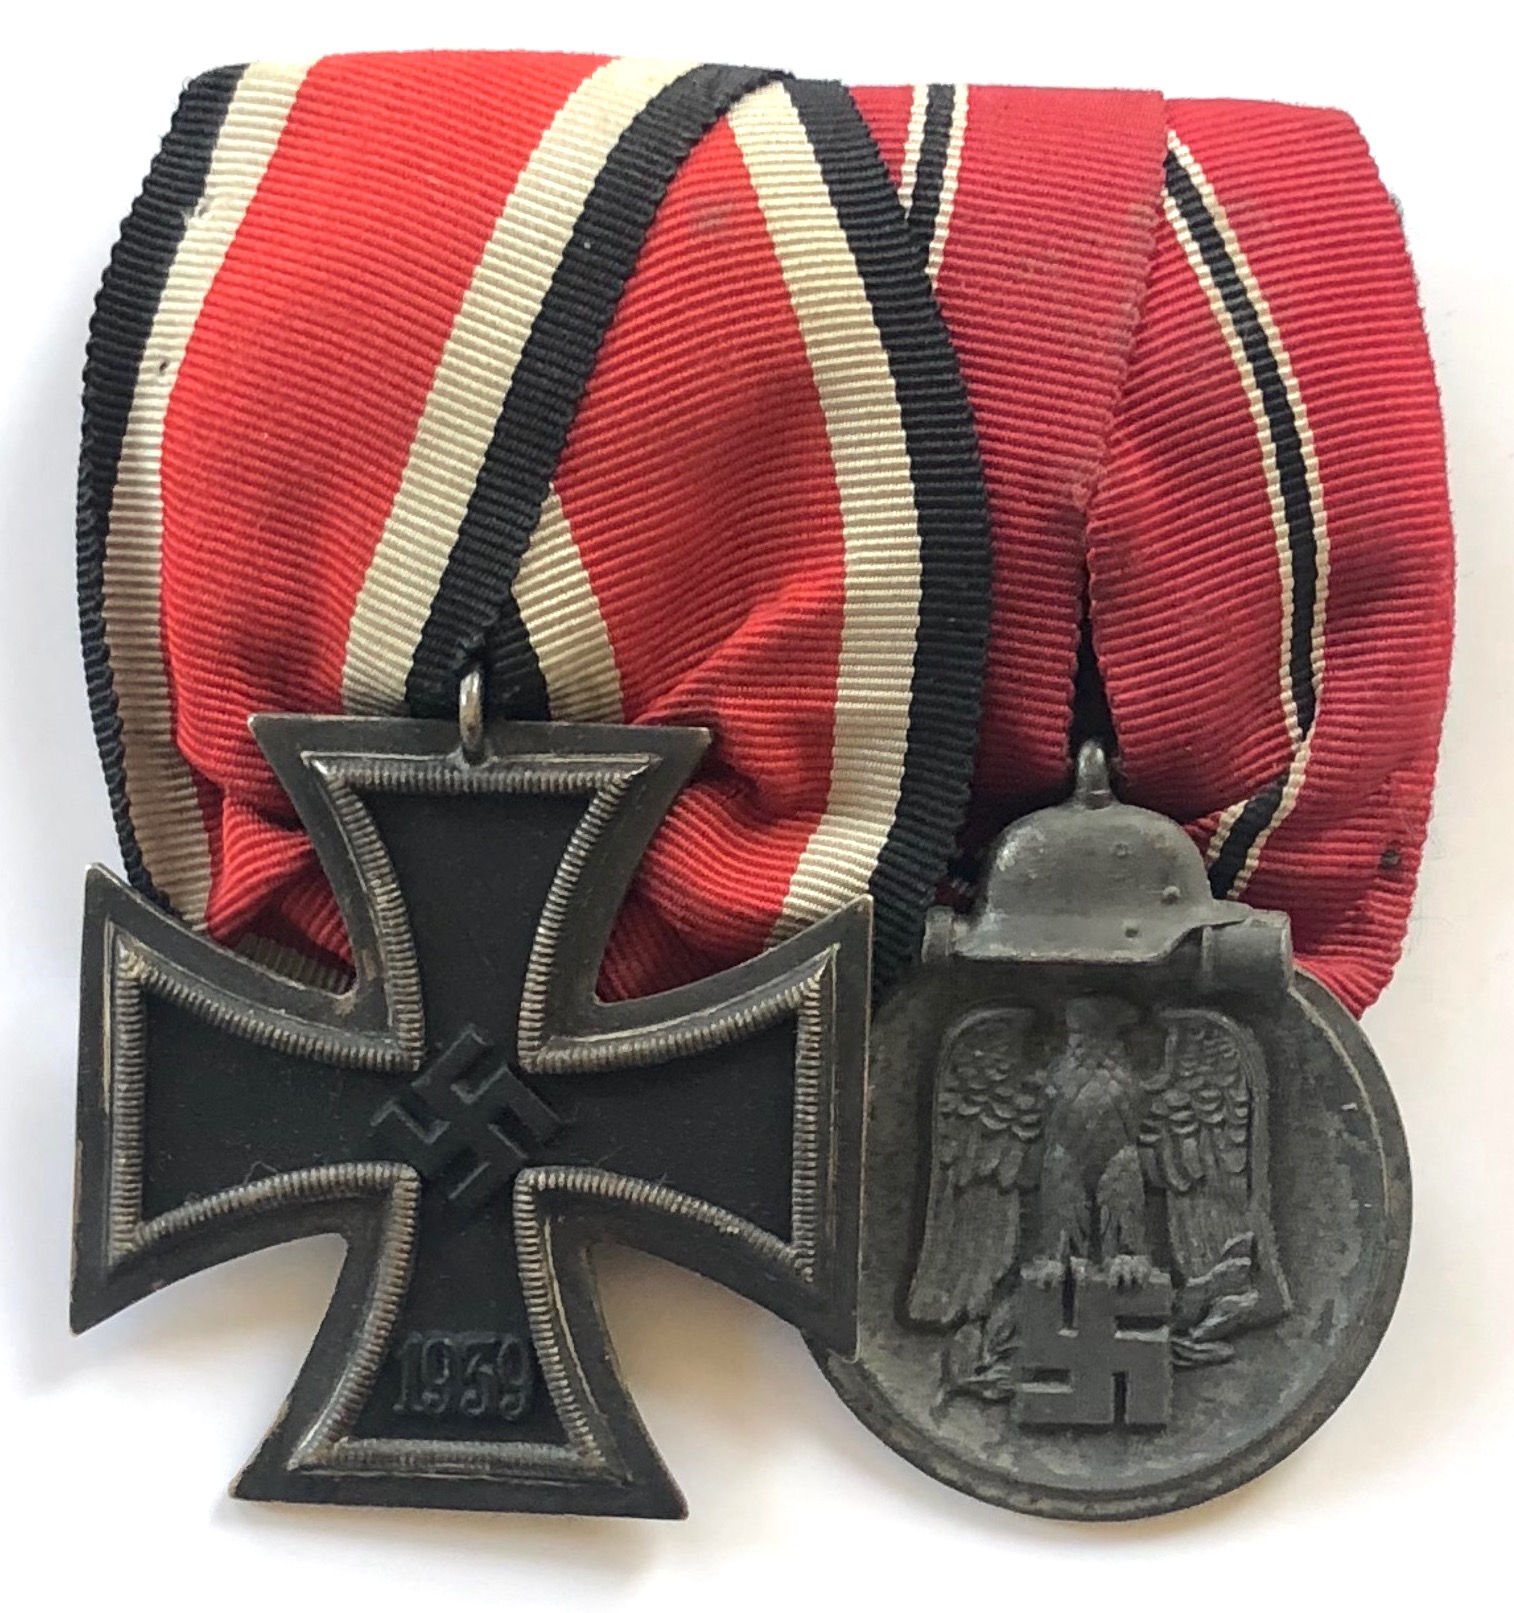 German Third Reich Iron Cross and Eastern Front pair of medals. Good 1939 Iron Cross 2nd Class